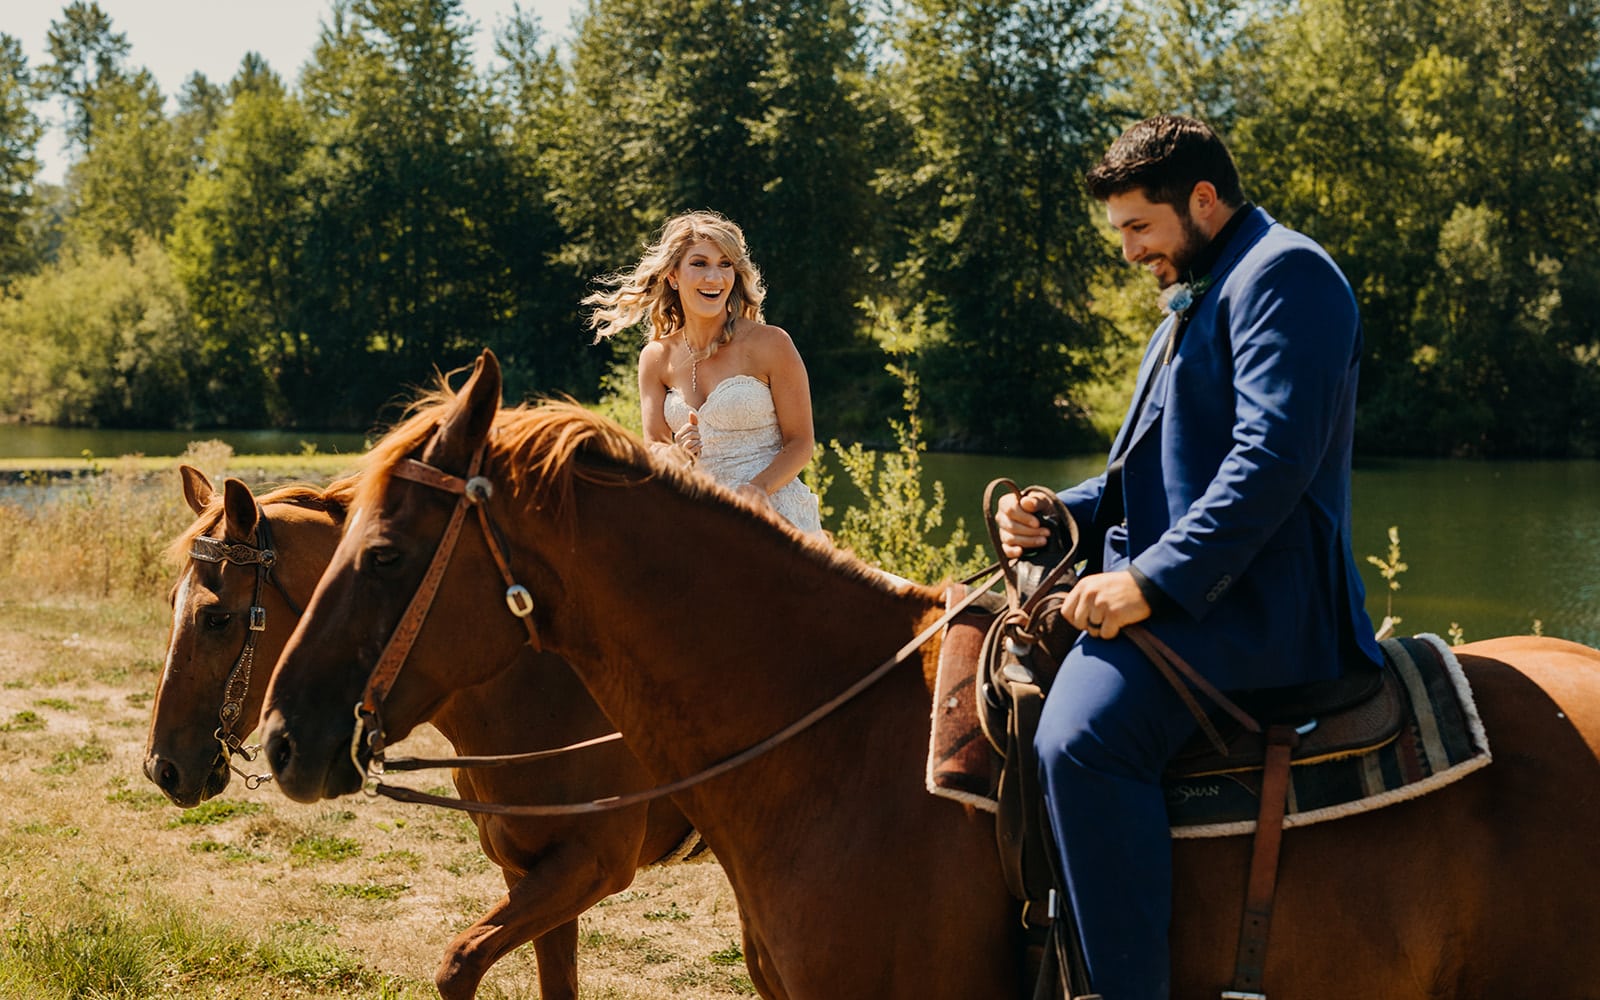 The couple laughs together as they ride horses together. 